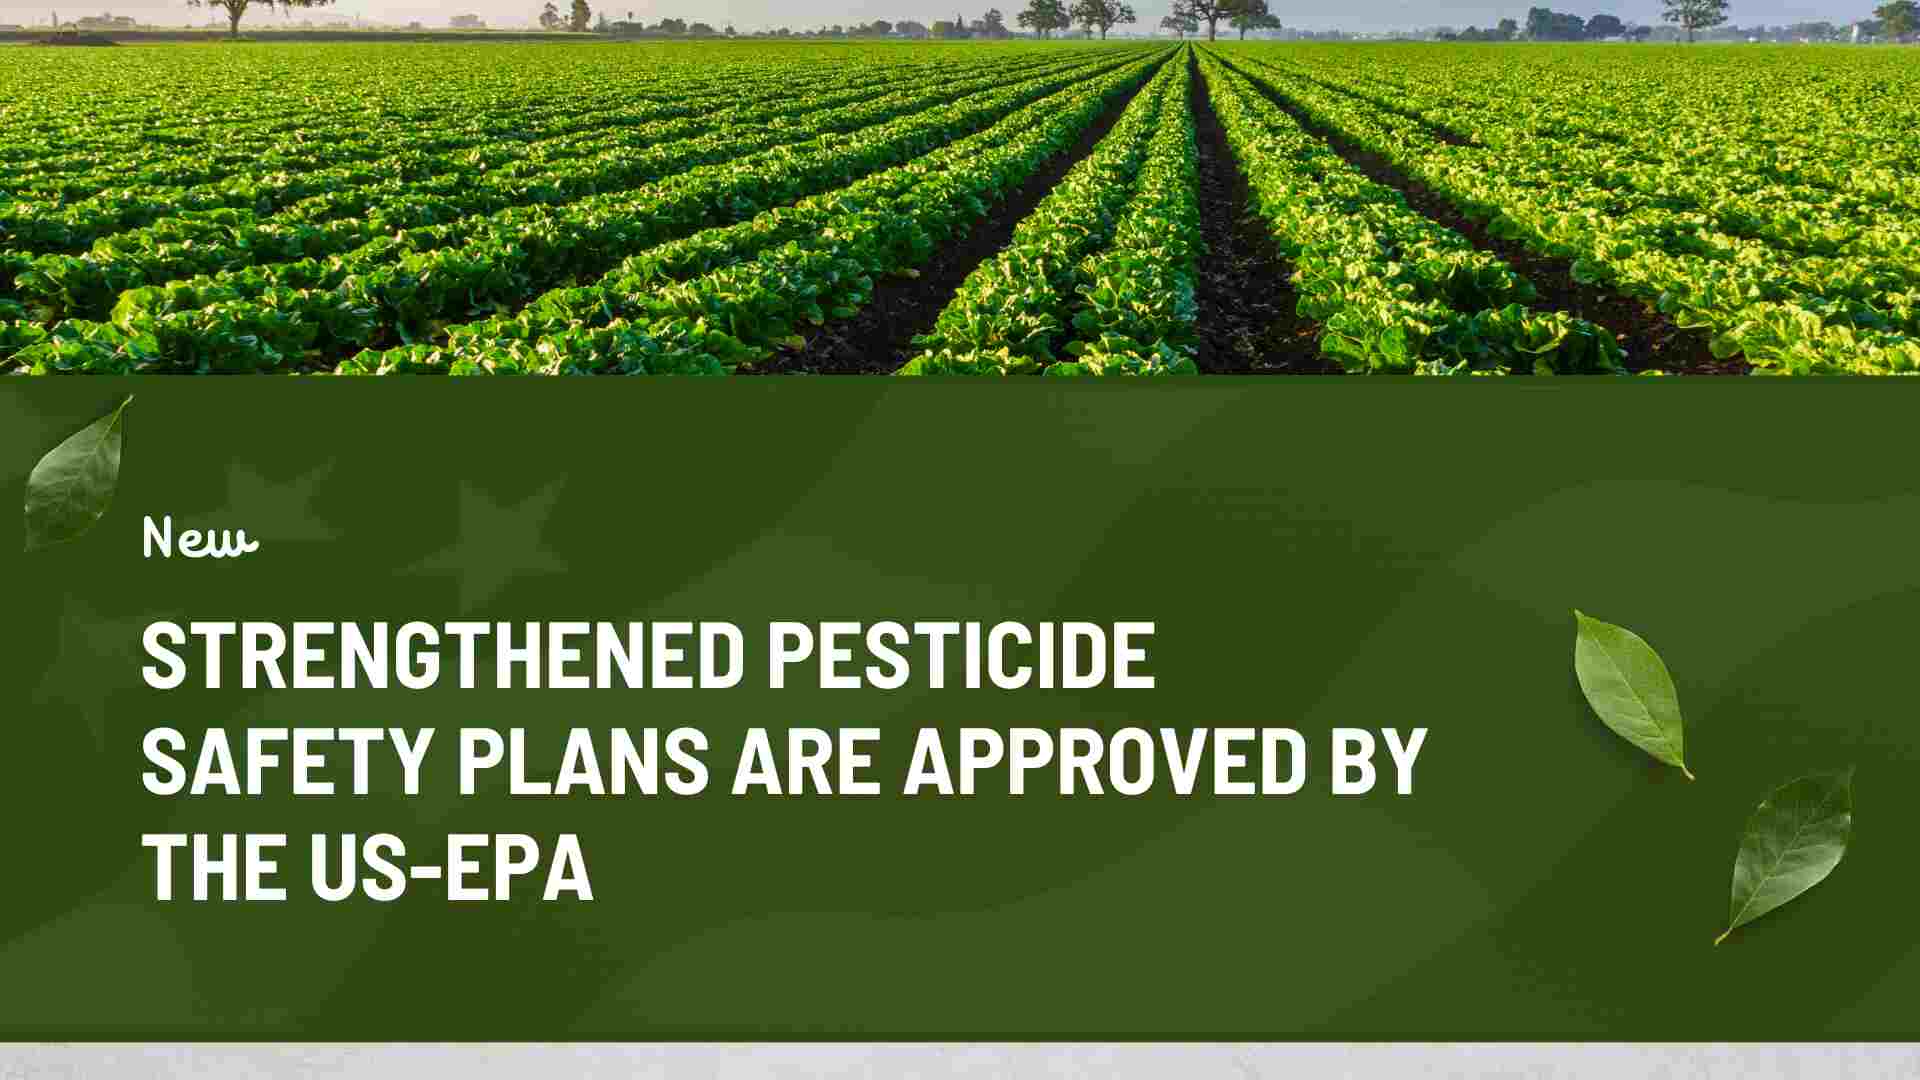 US EPA Approves Strengthened Pesticide Safety Plans for Certifying Applicators